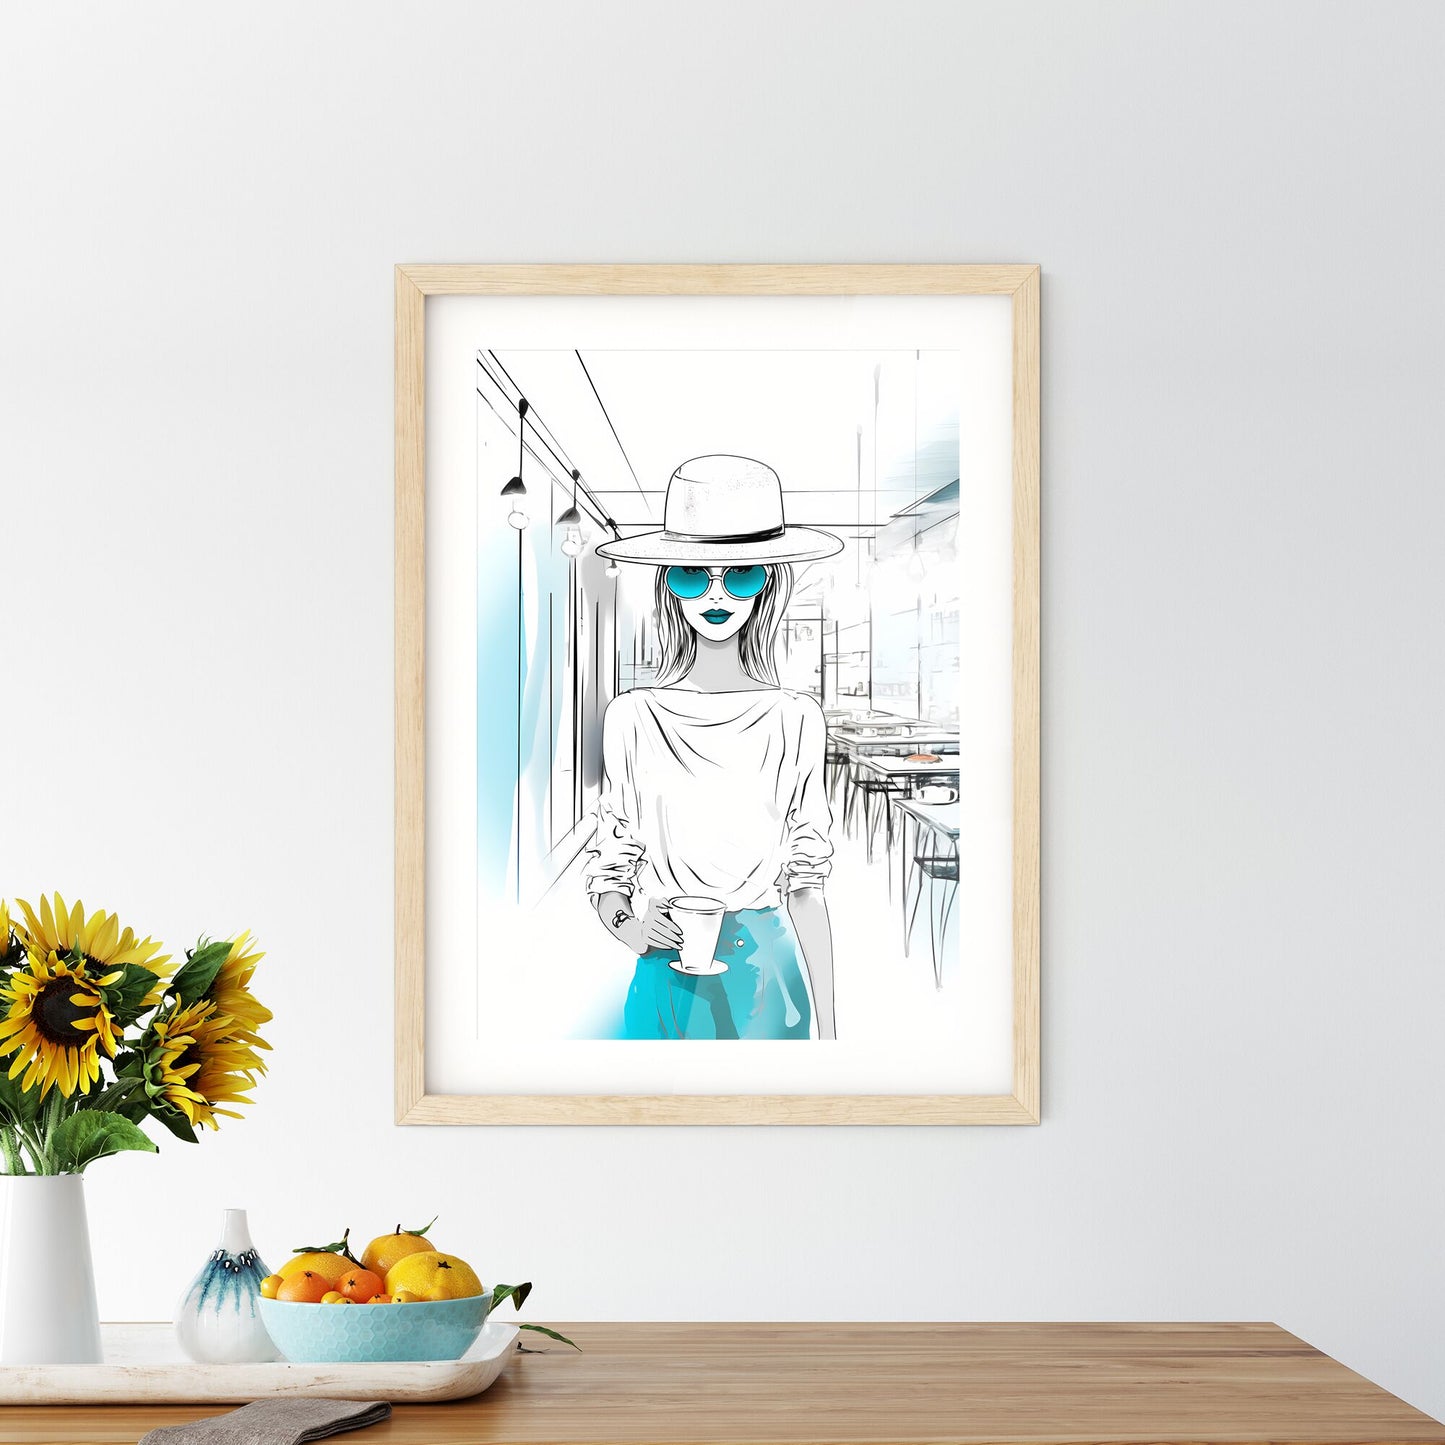 Lifestyle Fashion Illustration In The Coffee Bar - A Woman Wearing A Hat And Sunglasses Default Title